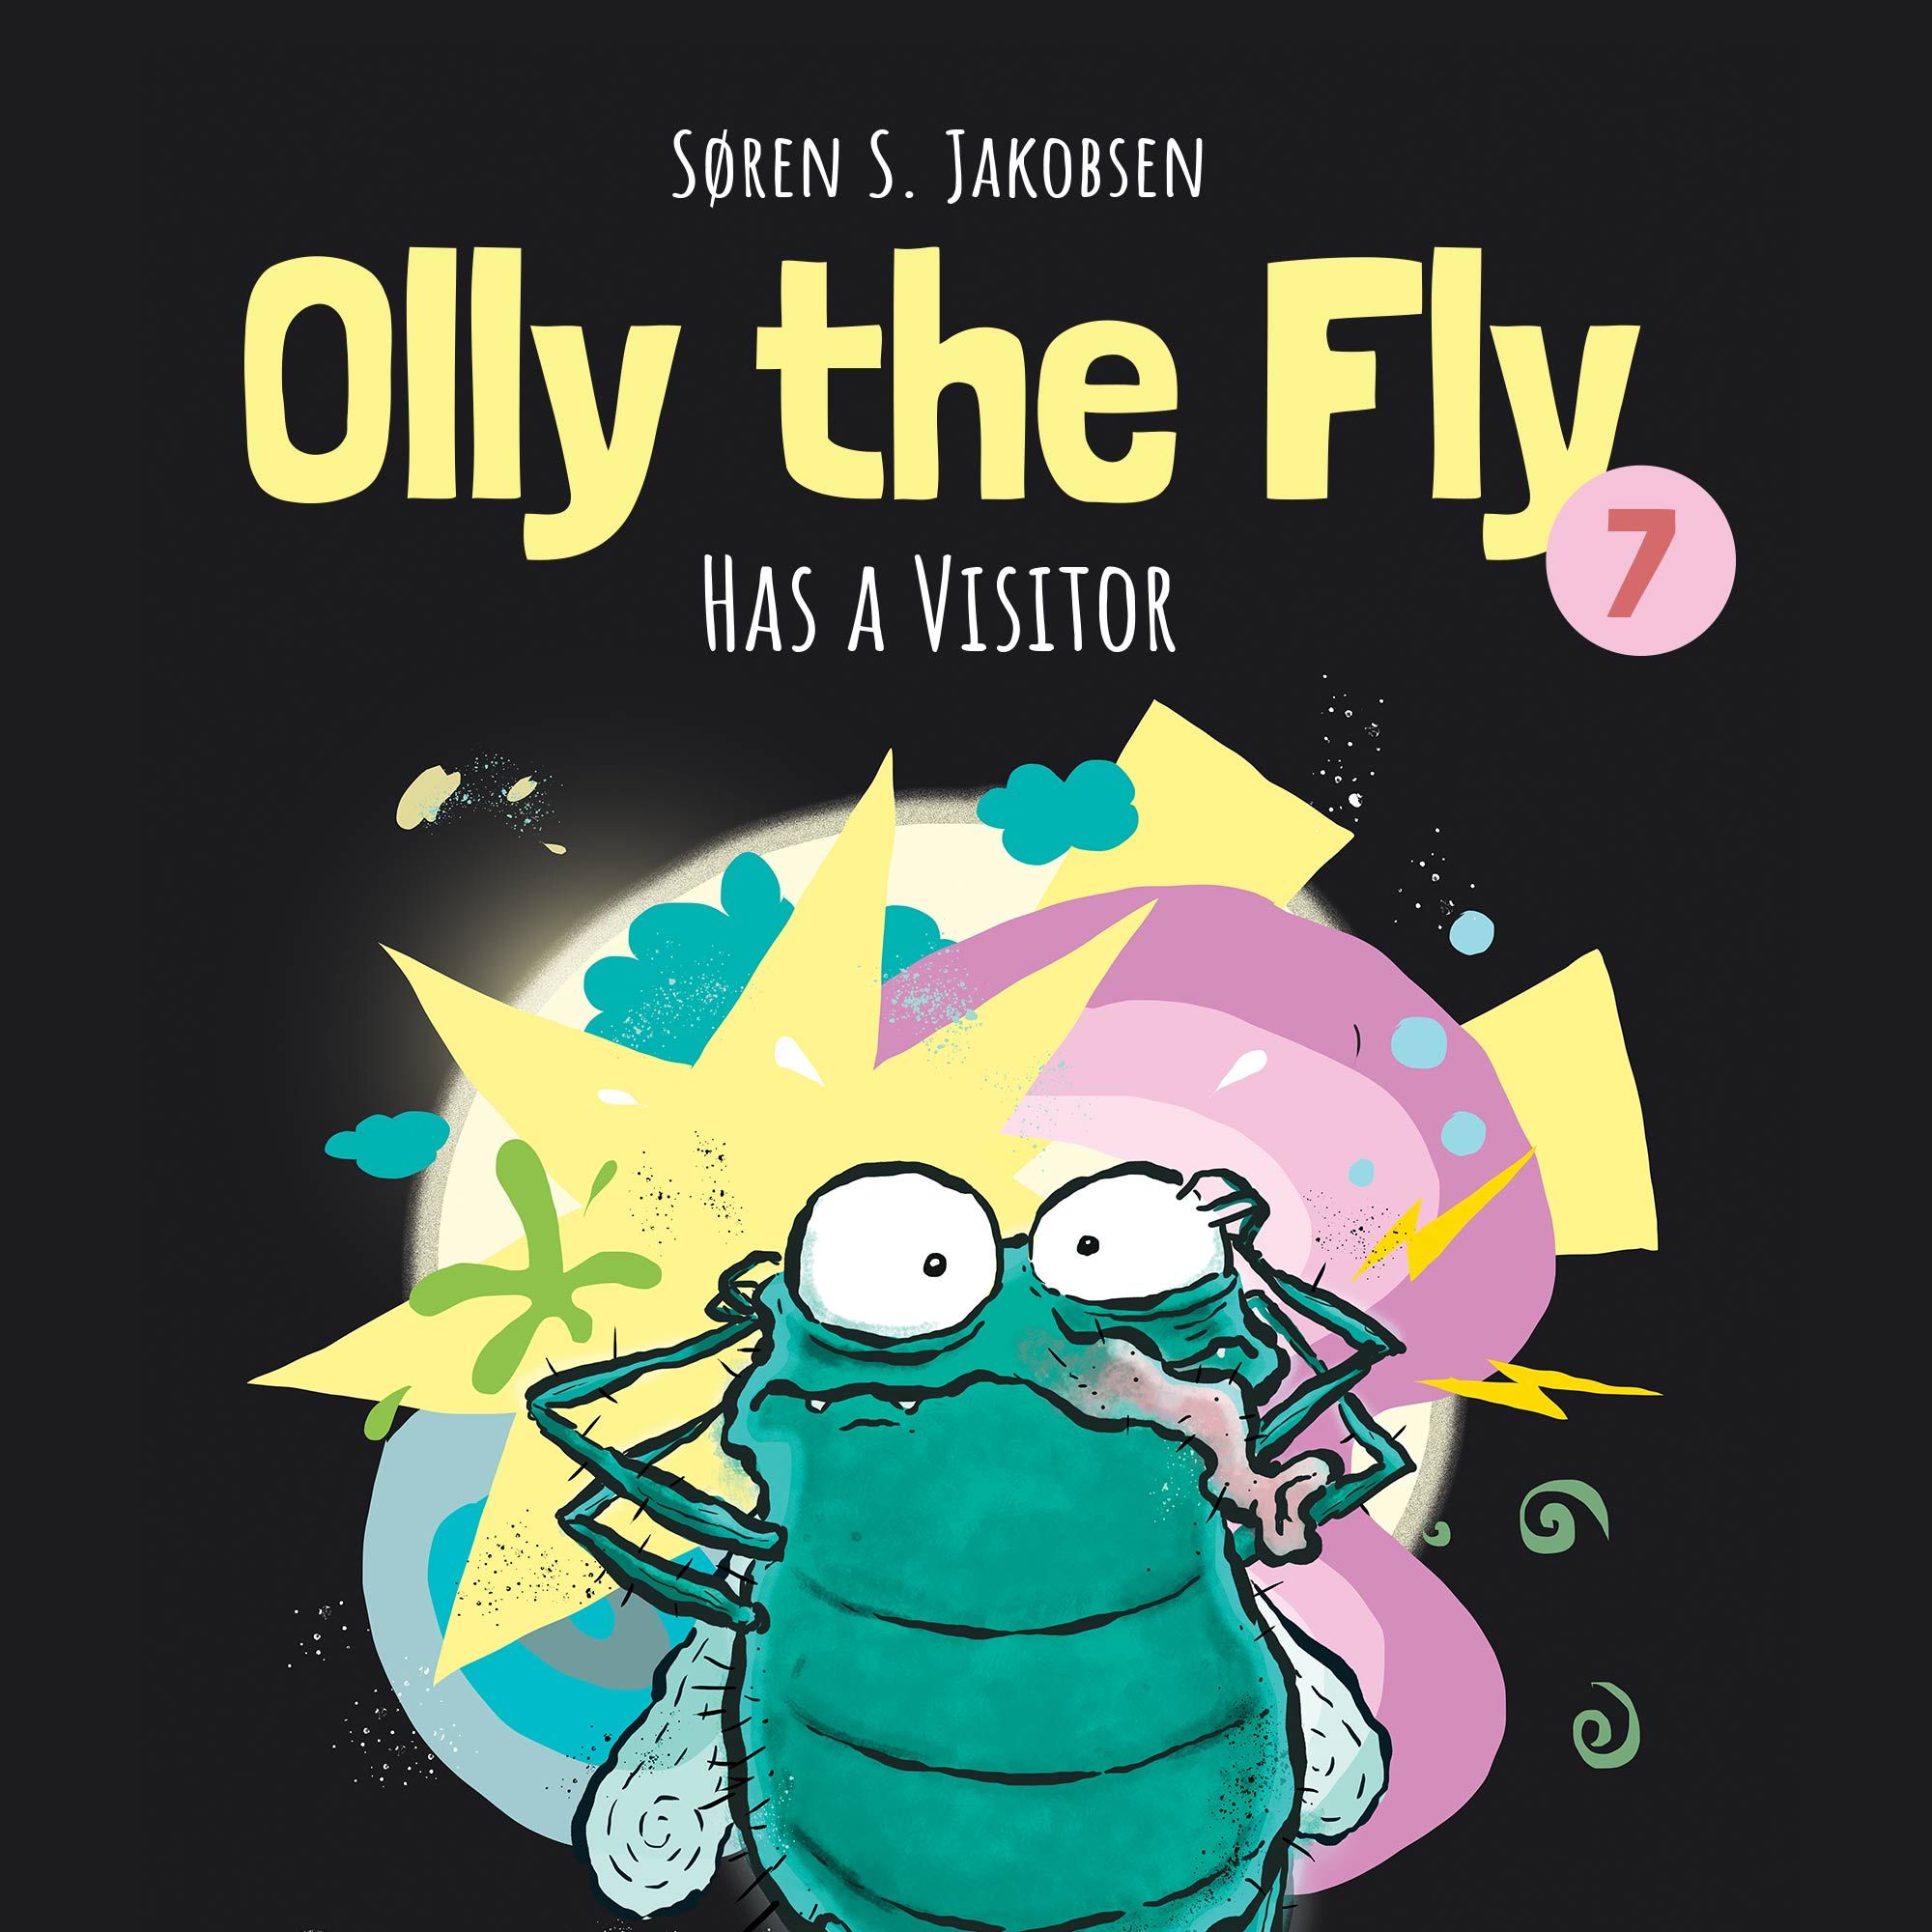 Olly the Fly #7: Olly the Fly Has a Visitor, audiobook by Søren S. Jakobsen